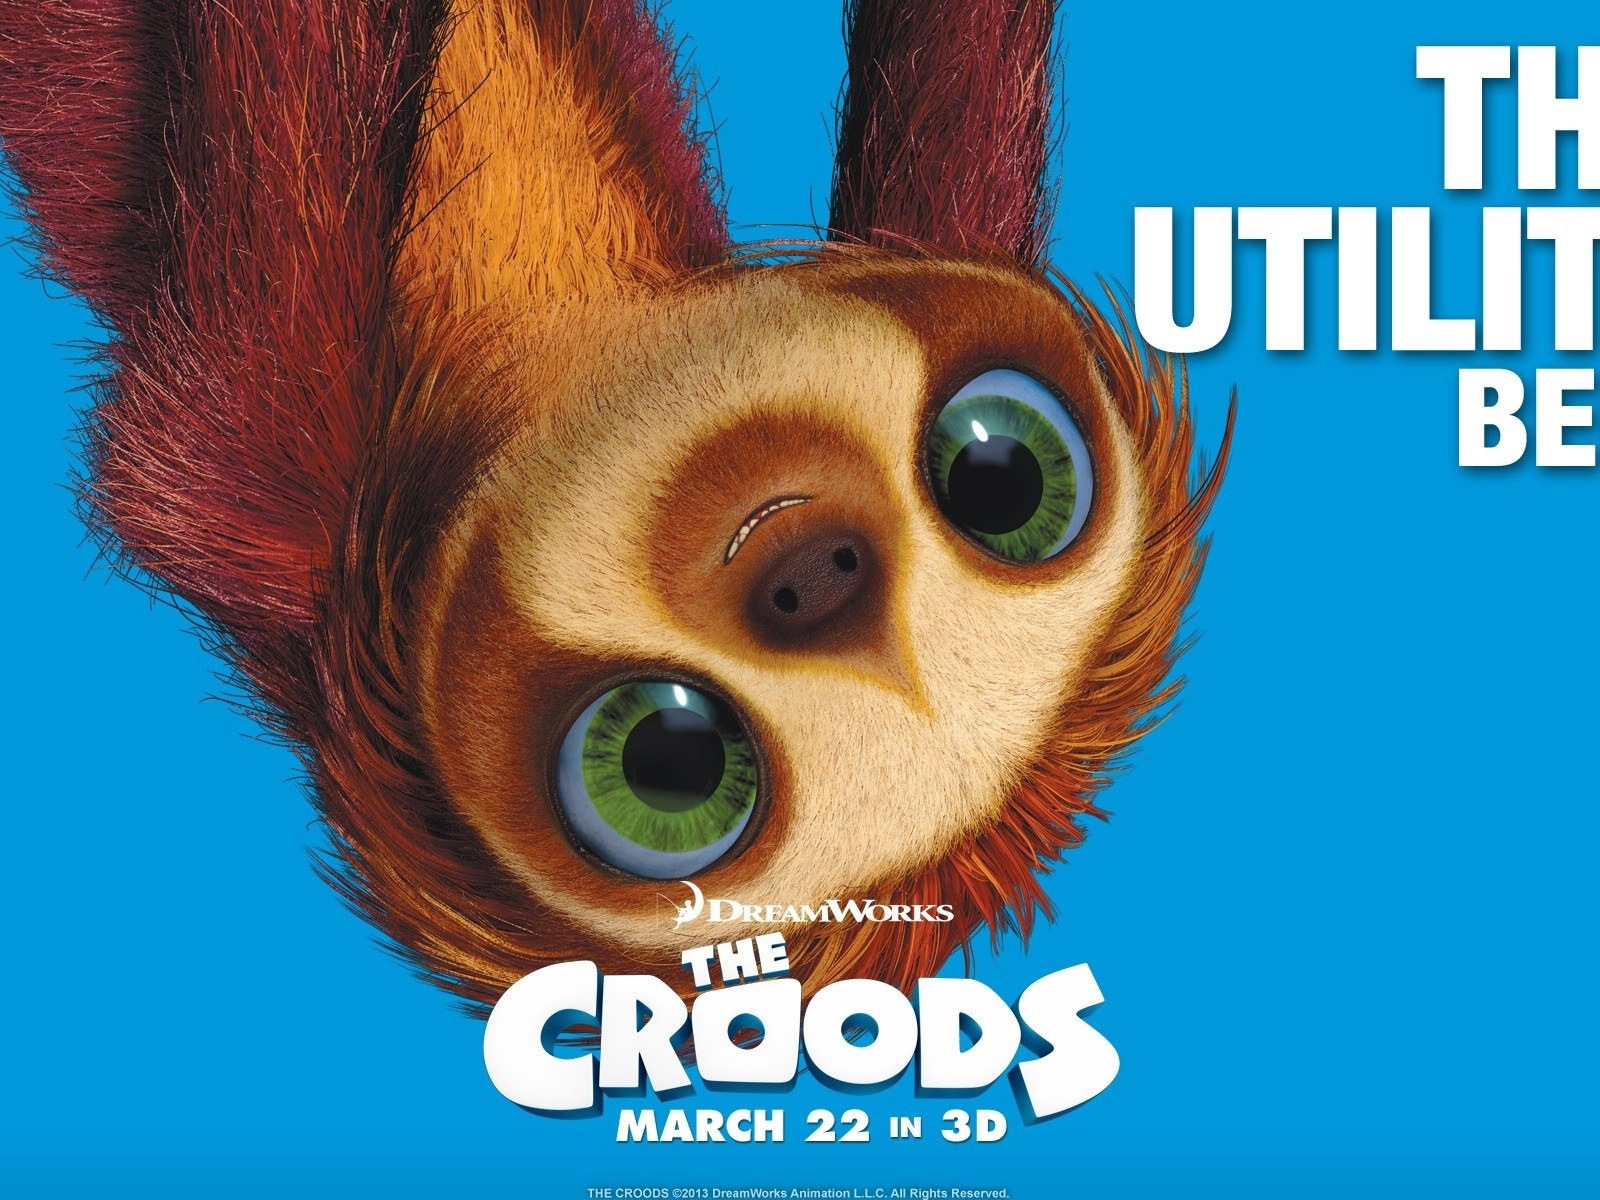 The Croods HD movie wallpapers #14 - 1600x1200